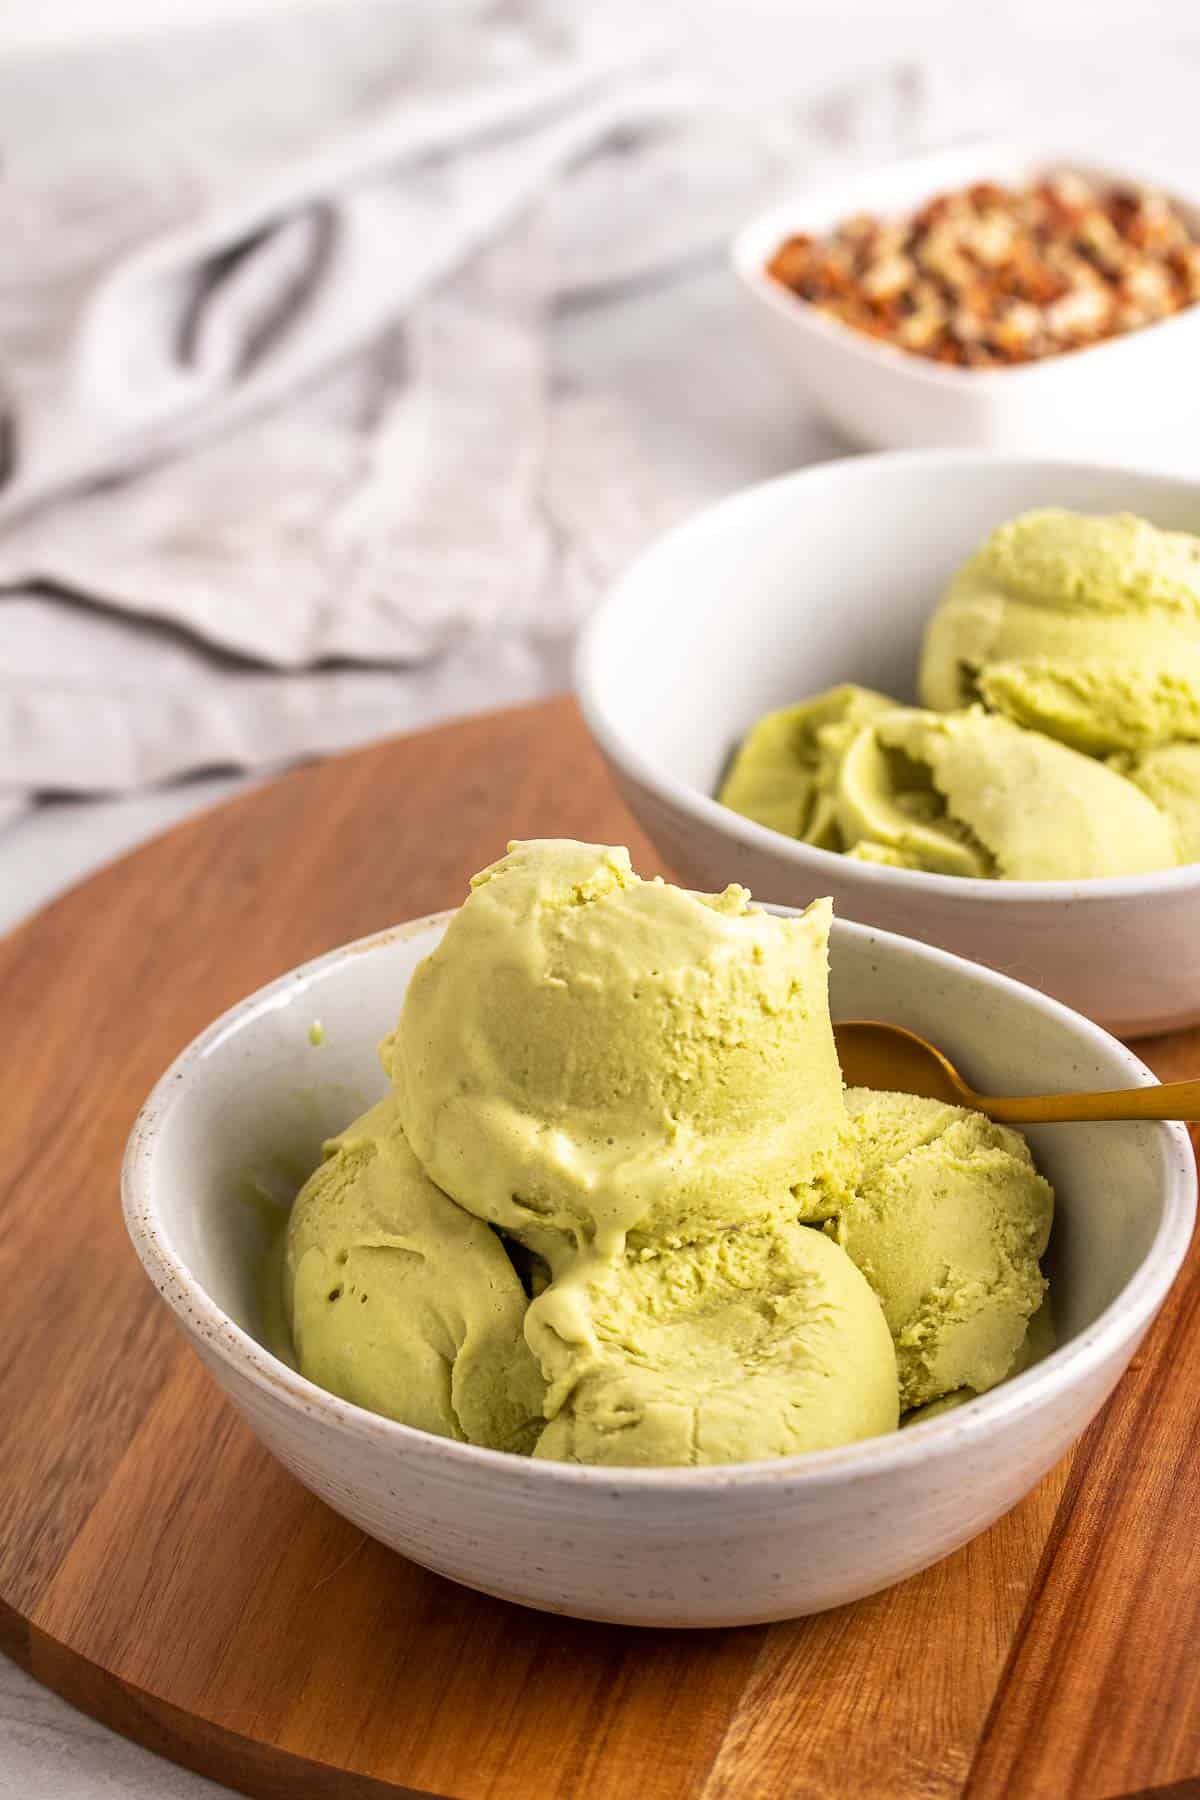 Four scoops of matcha green tea ice cream in a white bowl with a second bowl in the background, both on a wooden serving board